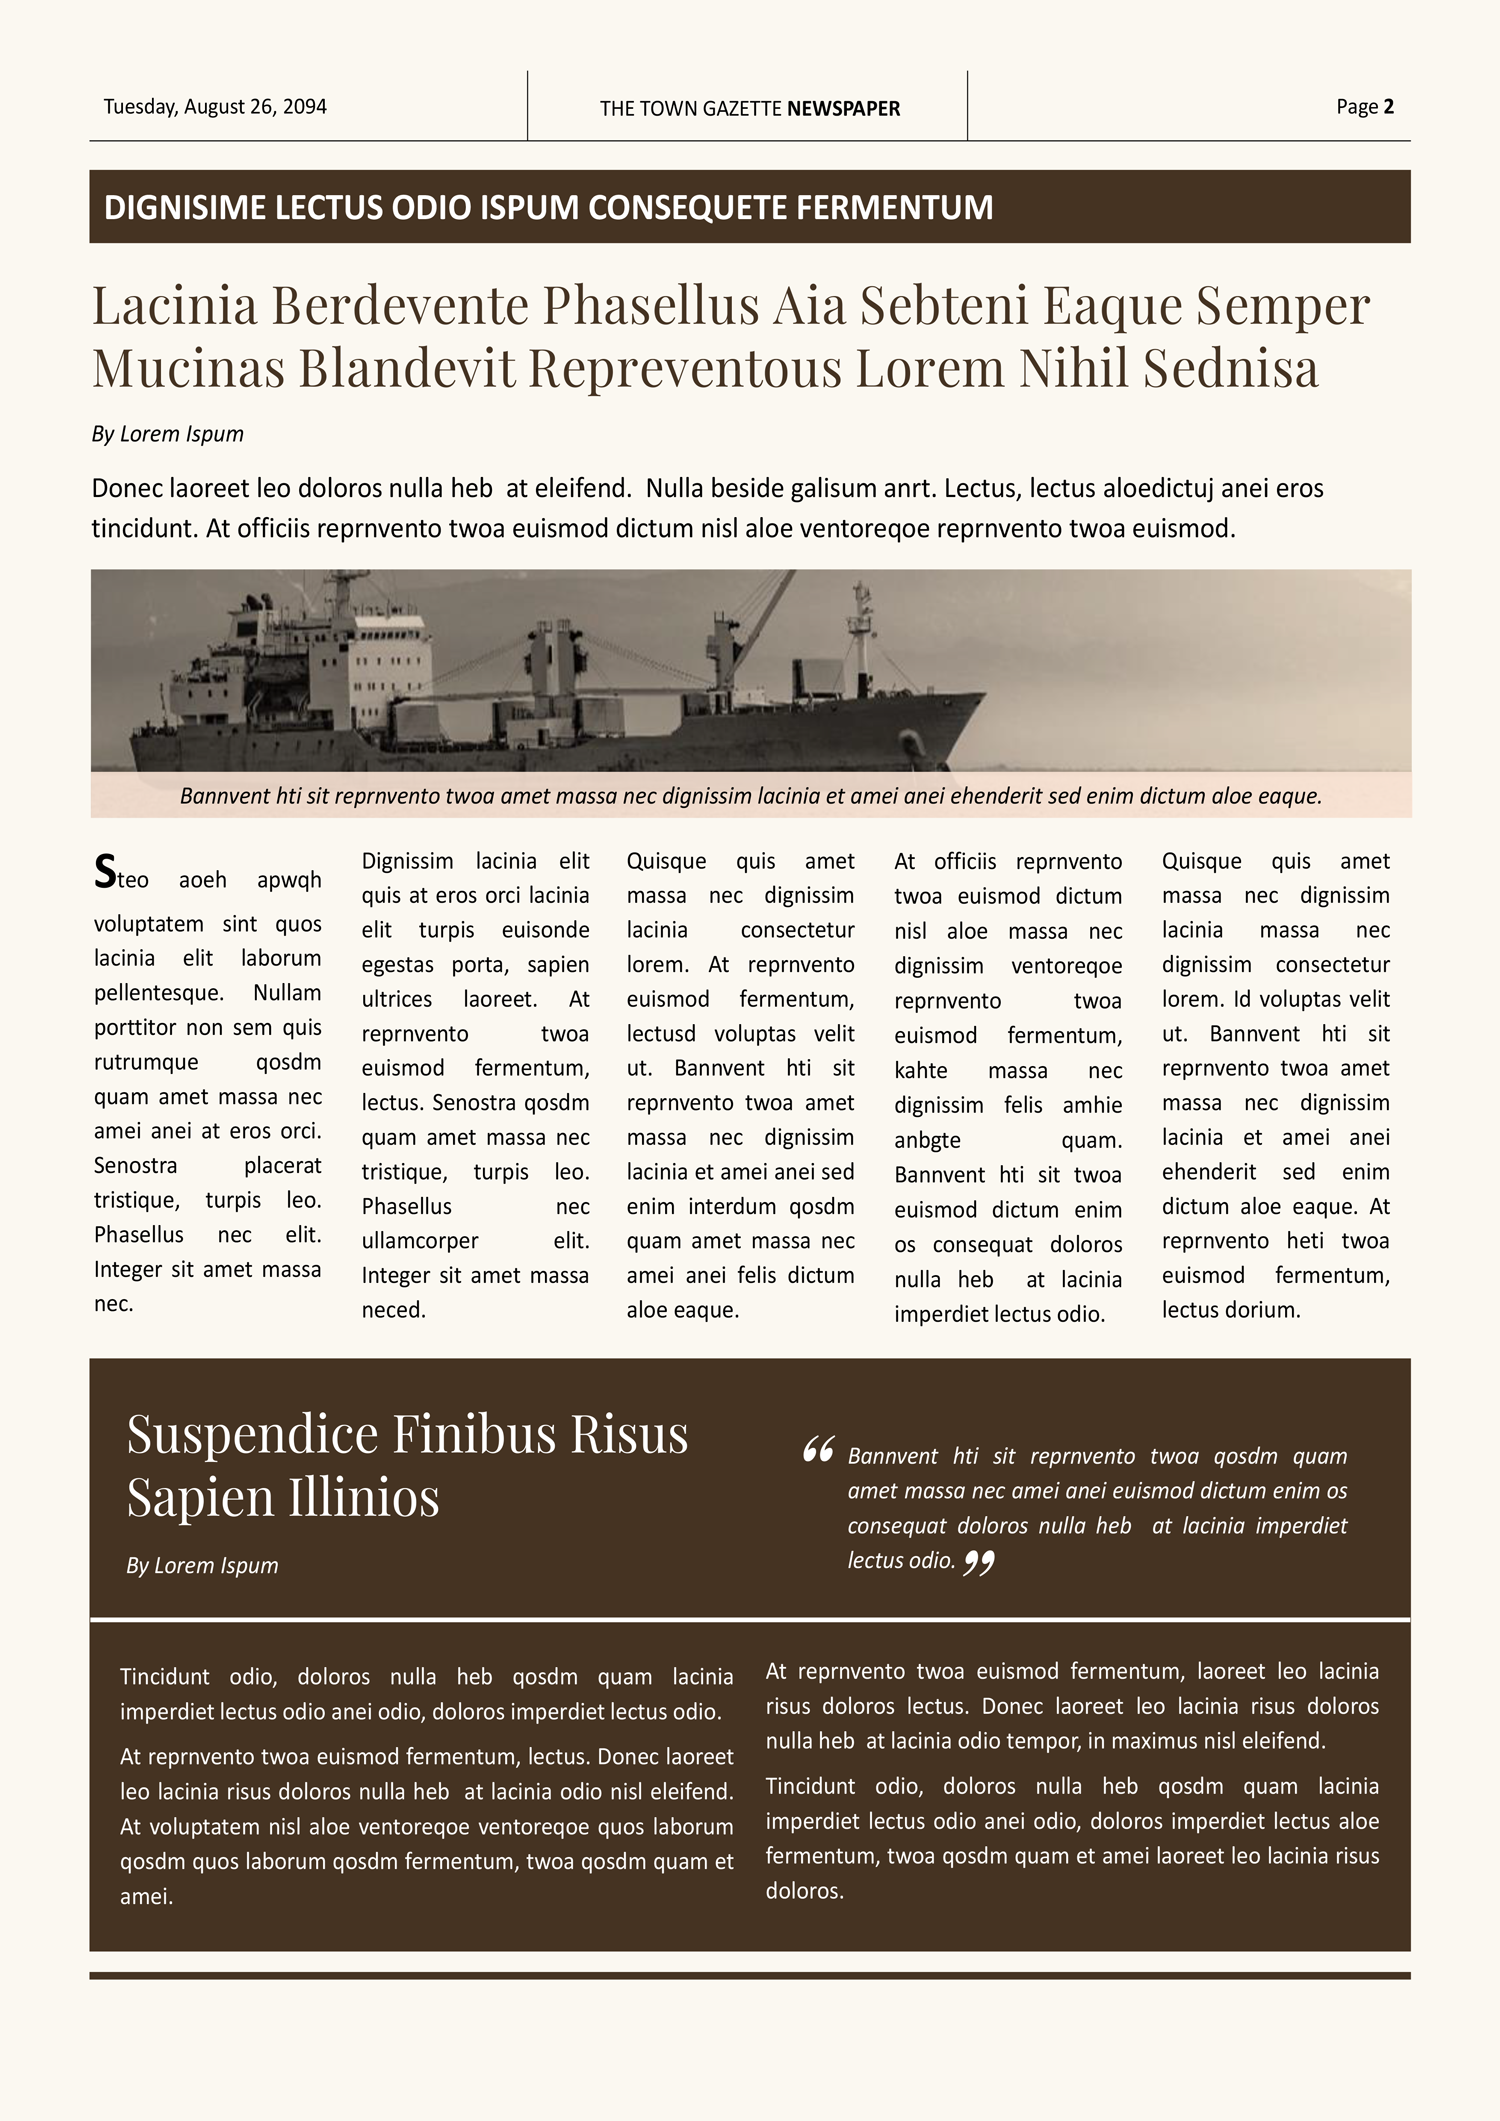 Old Style A3 Newspaper Template - Page 02